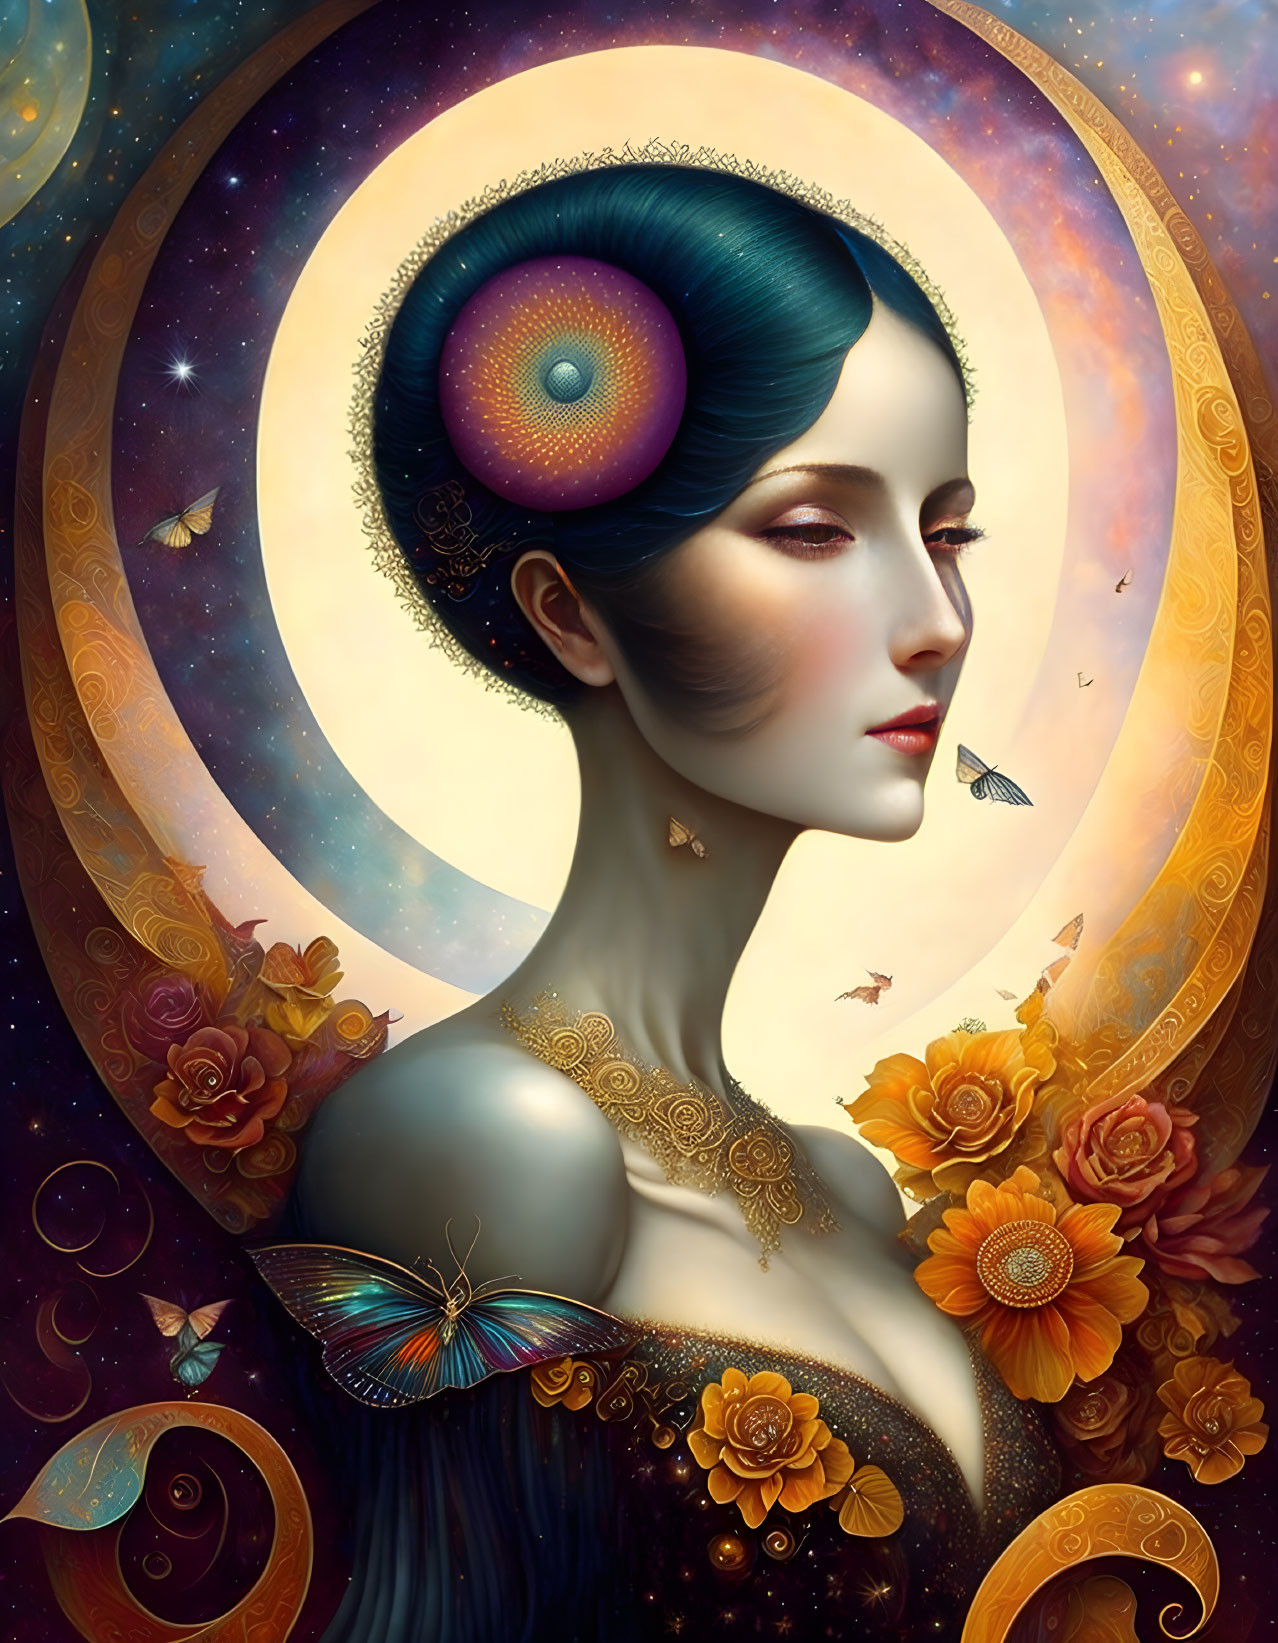 Ethereal artwork featuring woman with celestial, floral motifs, butterfly, and peacock feather hairstyle in